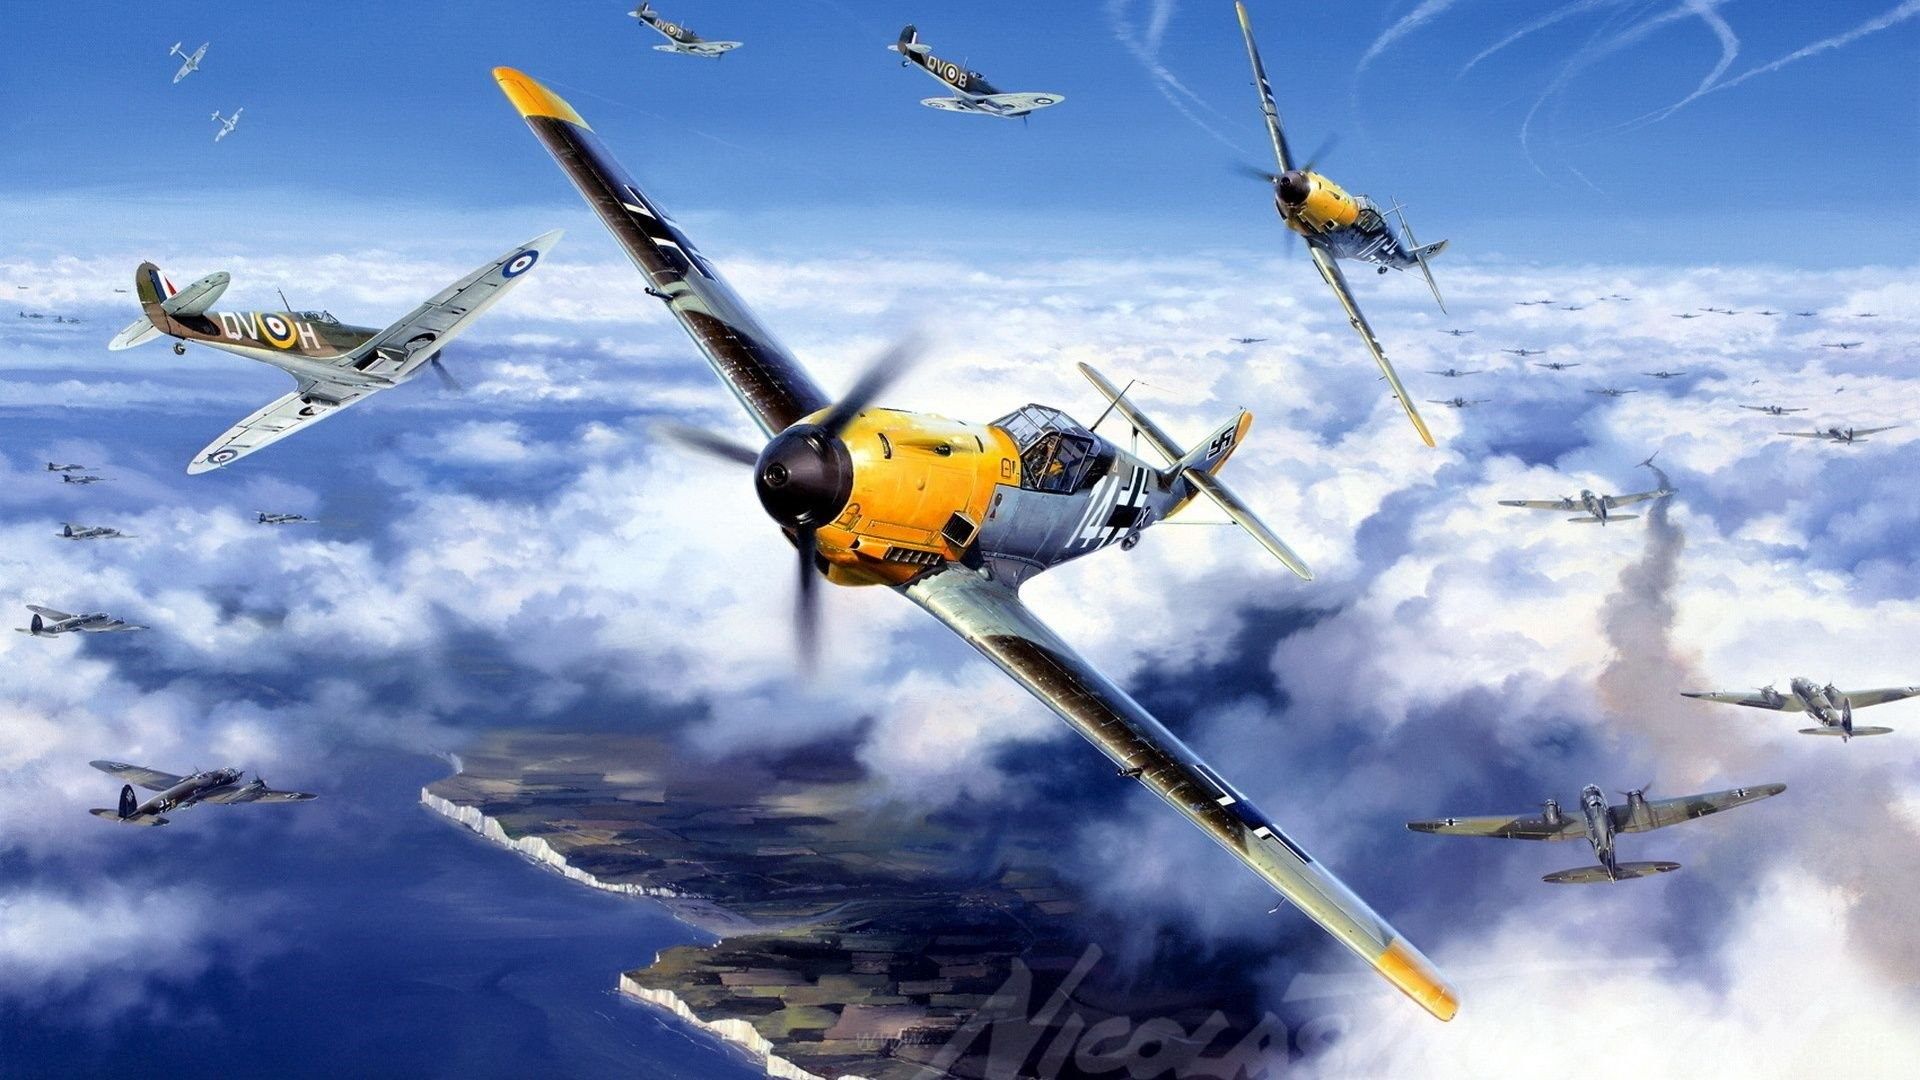 The Me Messerschmit, Bf 109 Wallpaper And Picture